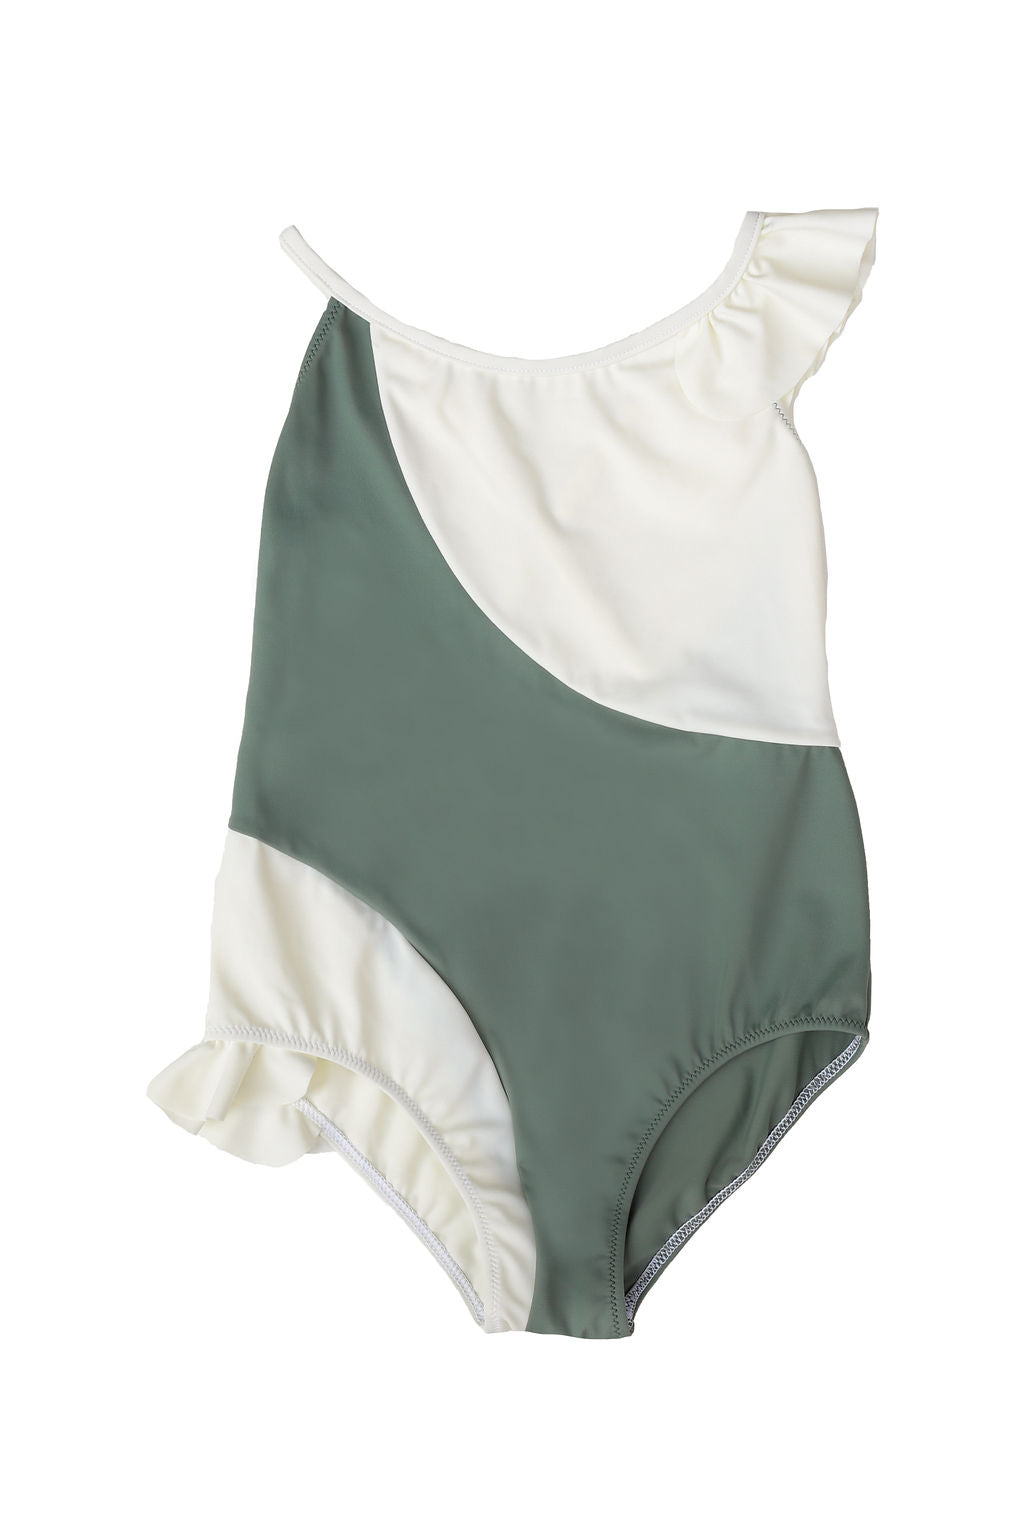 Coco One Piece Swimsuit Sage Green And Ivory